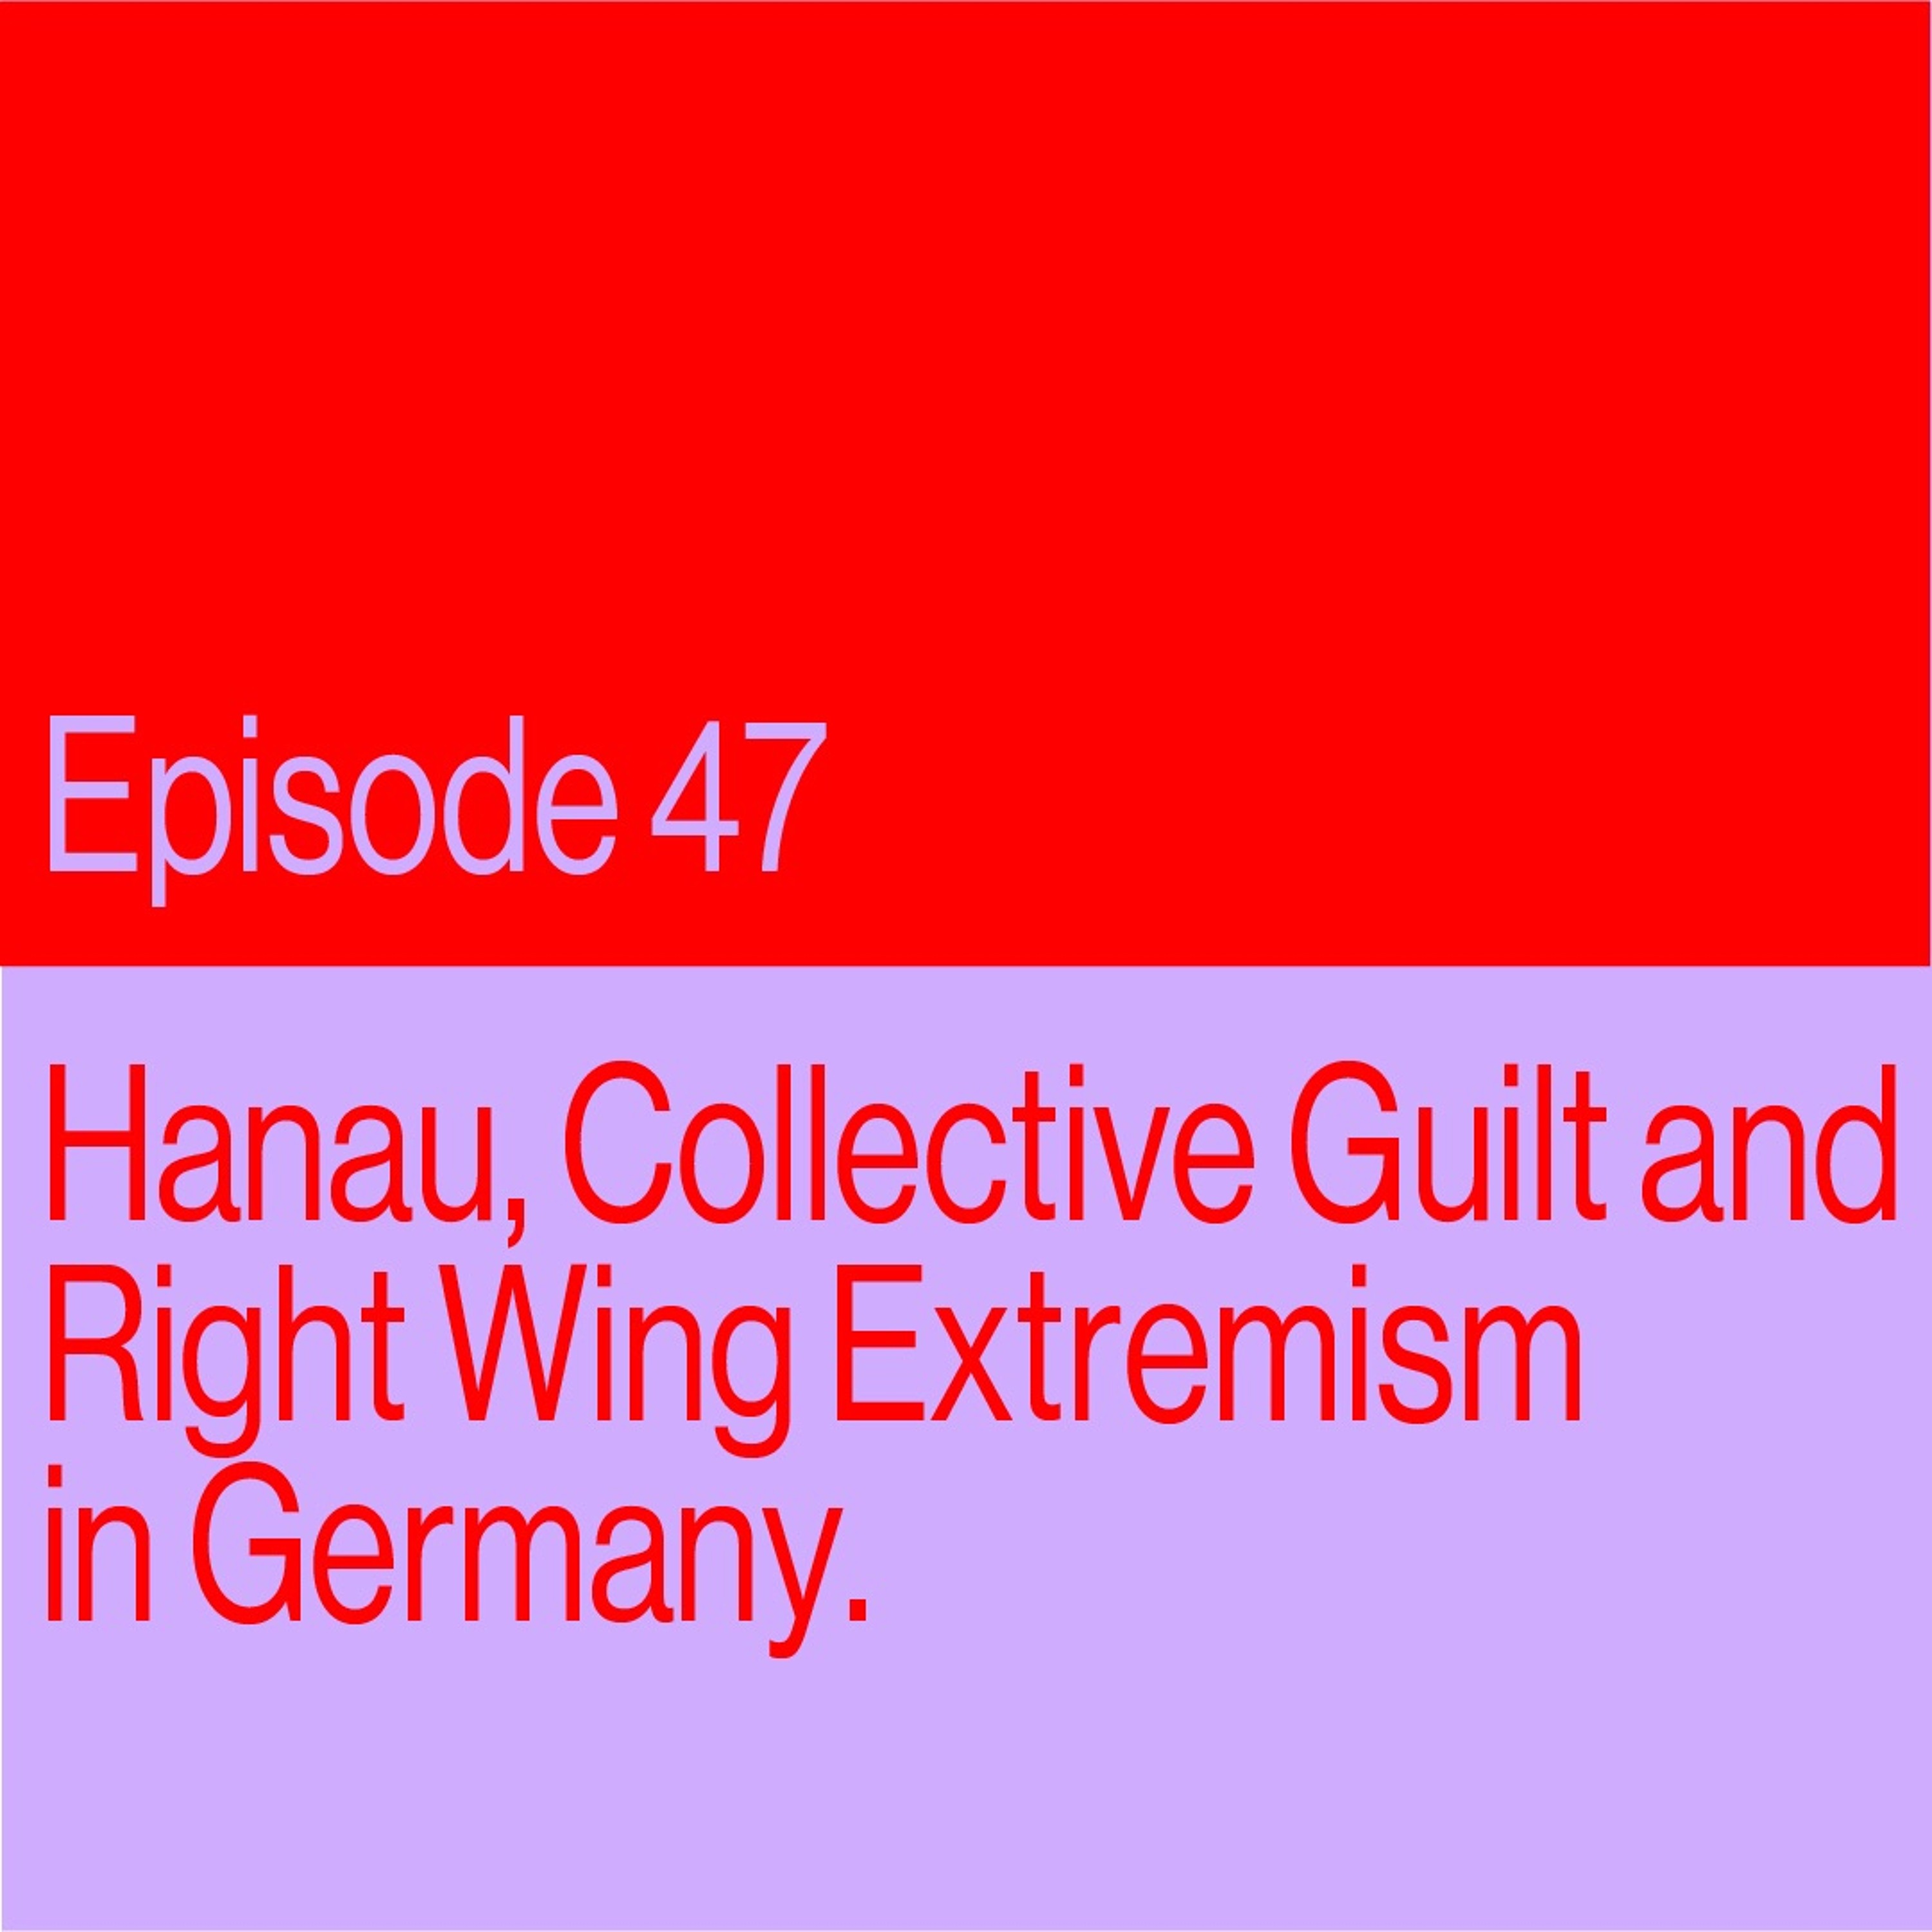 Episode 47: Hanau, Collective Guilt, and Right Wing Extremism in Germany